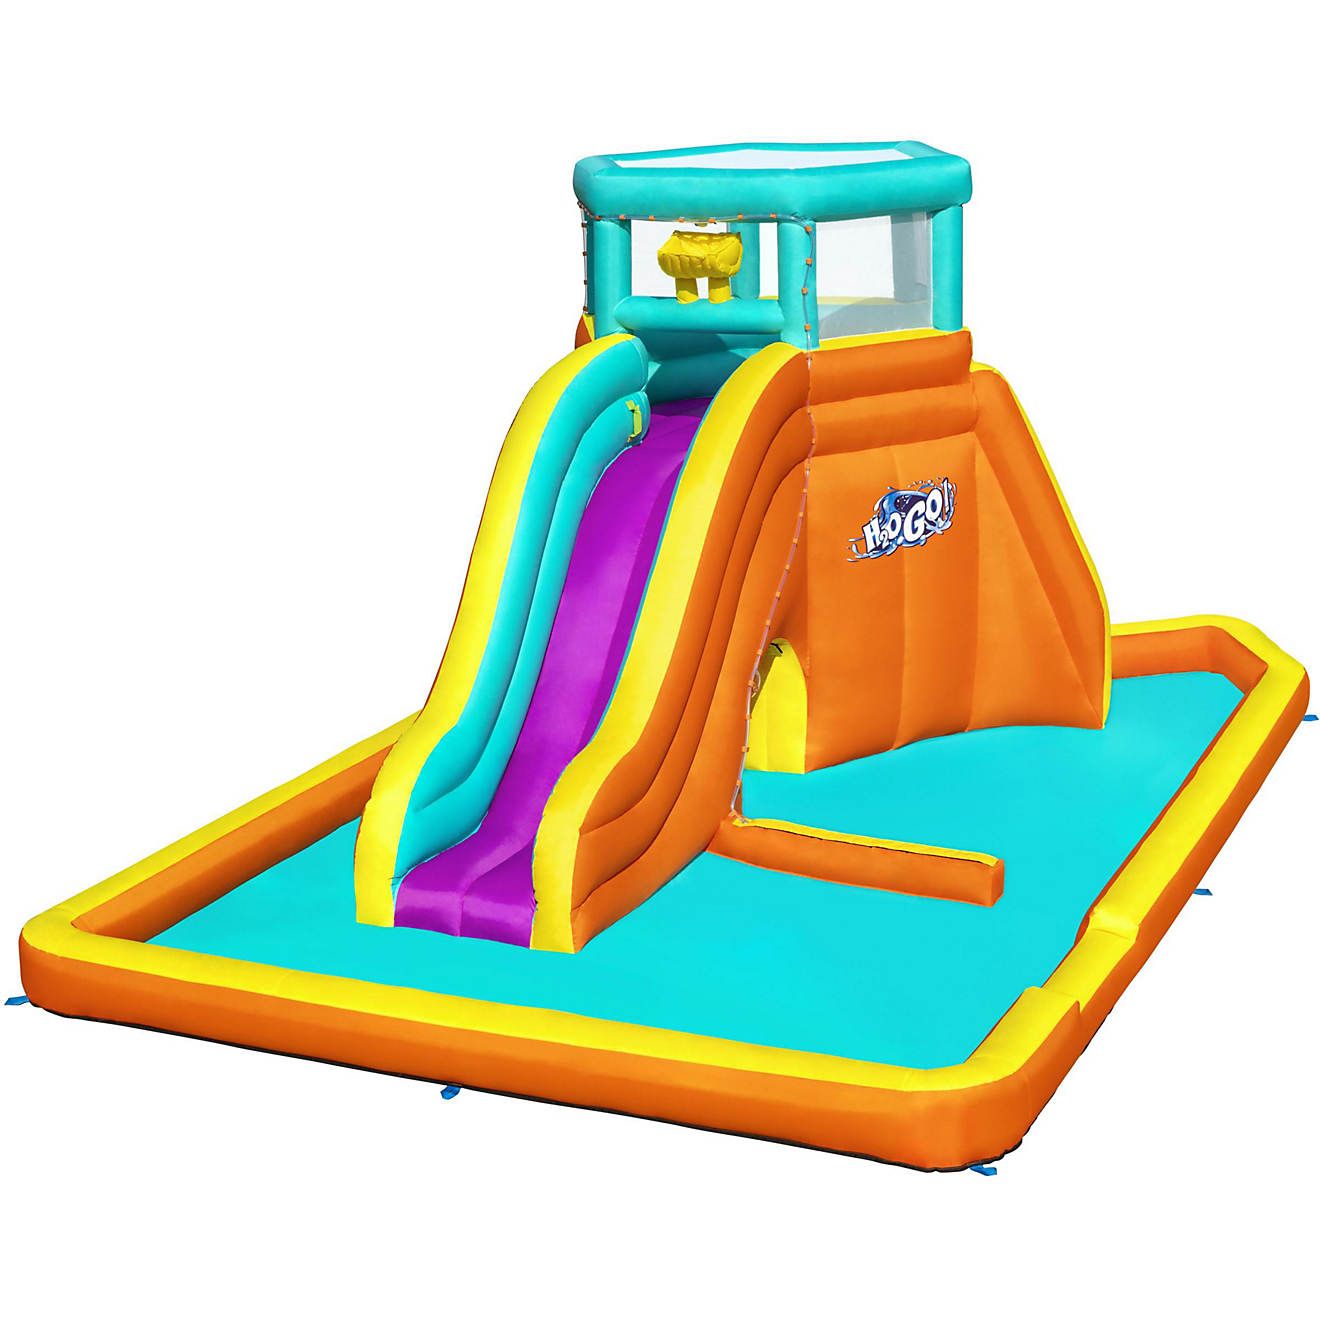 H2OGO! Tidal Tower Mega Water Park | Academy | Academy Sports + Outdoors